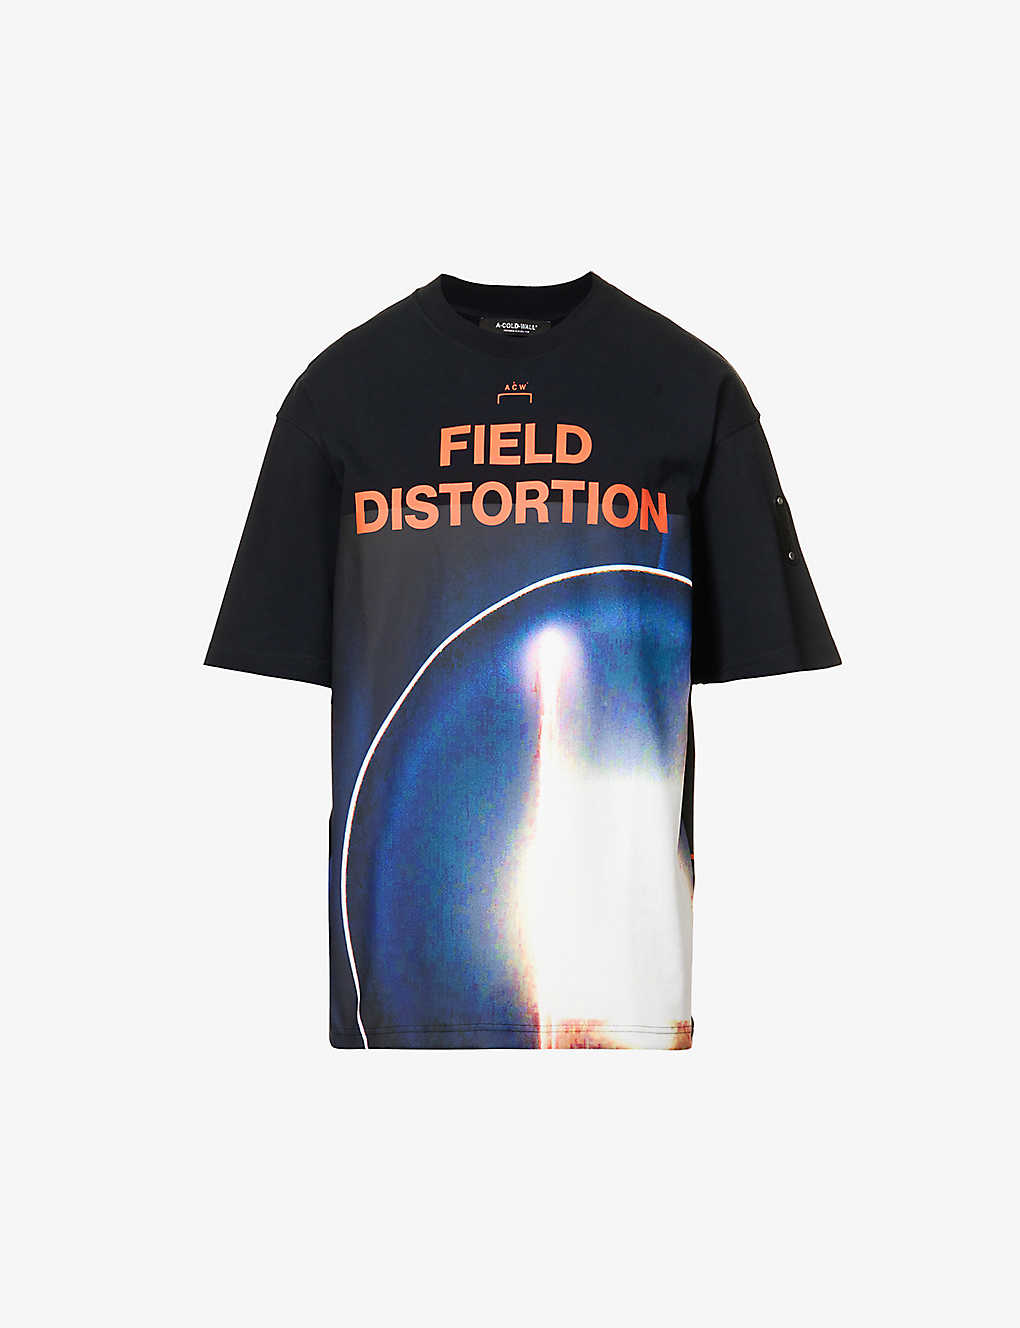 A-COLD-WALL* A COLD WALL MEN'S BLACK FIELD DISTORTION GRAPHIC-PRINT COTTON-JERSEY T-SHIRT,65909462